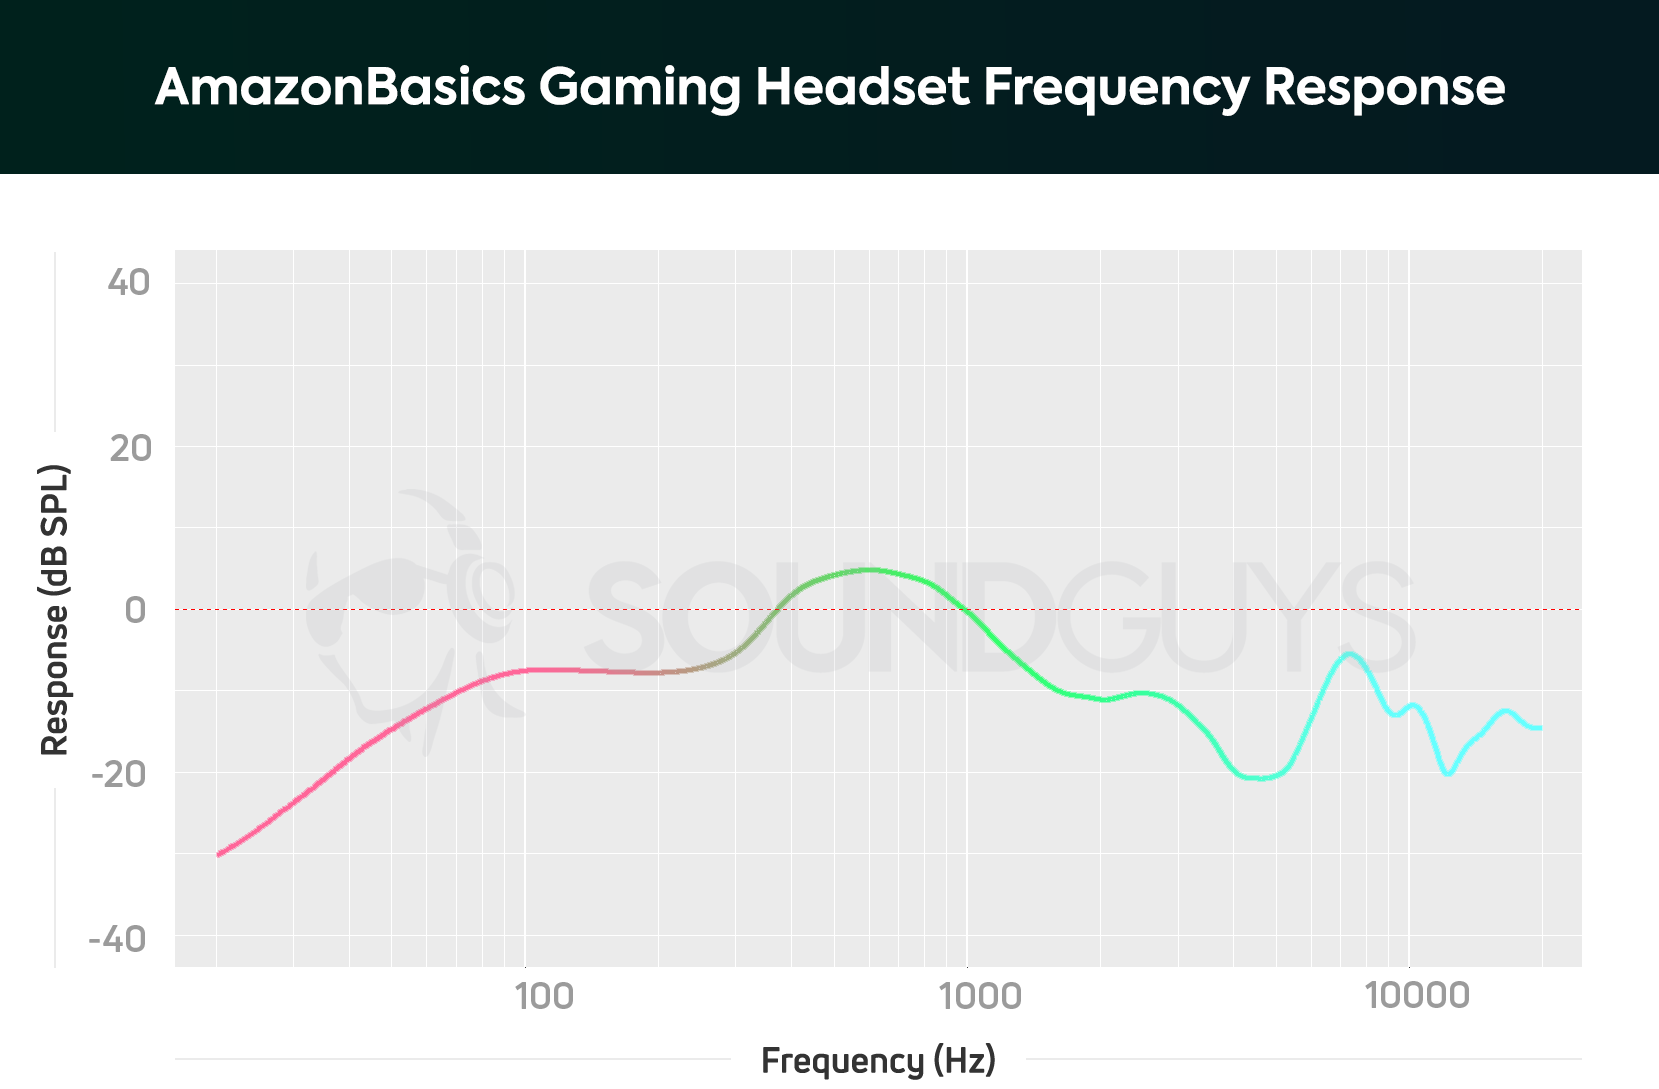 A frequency response chart for the AmazonBasics Gaming Headset